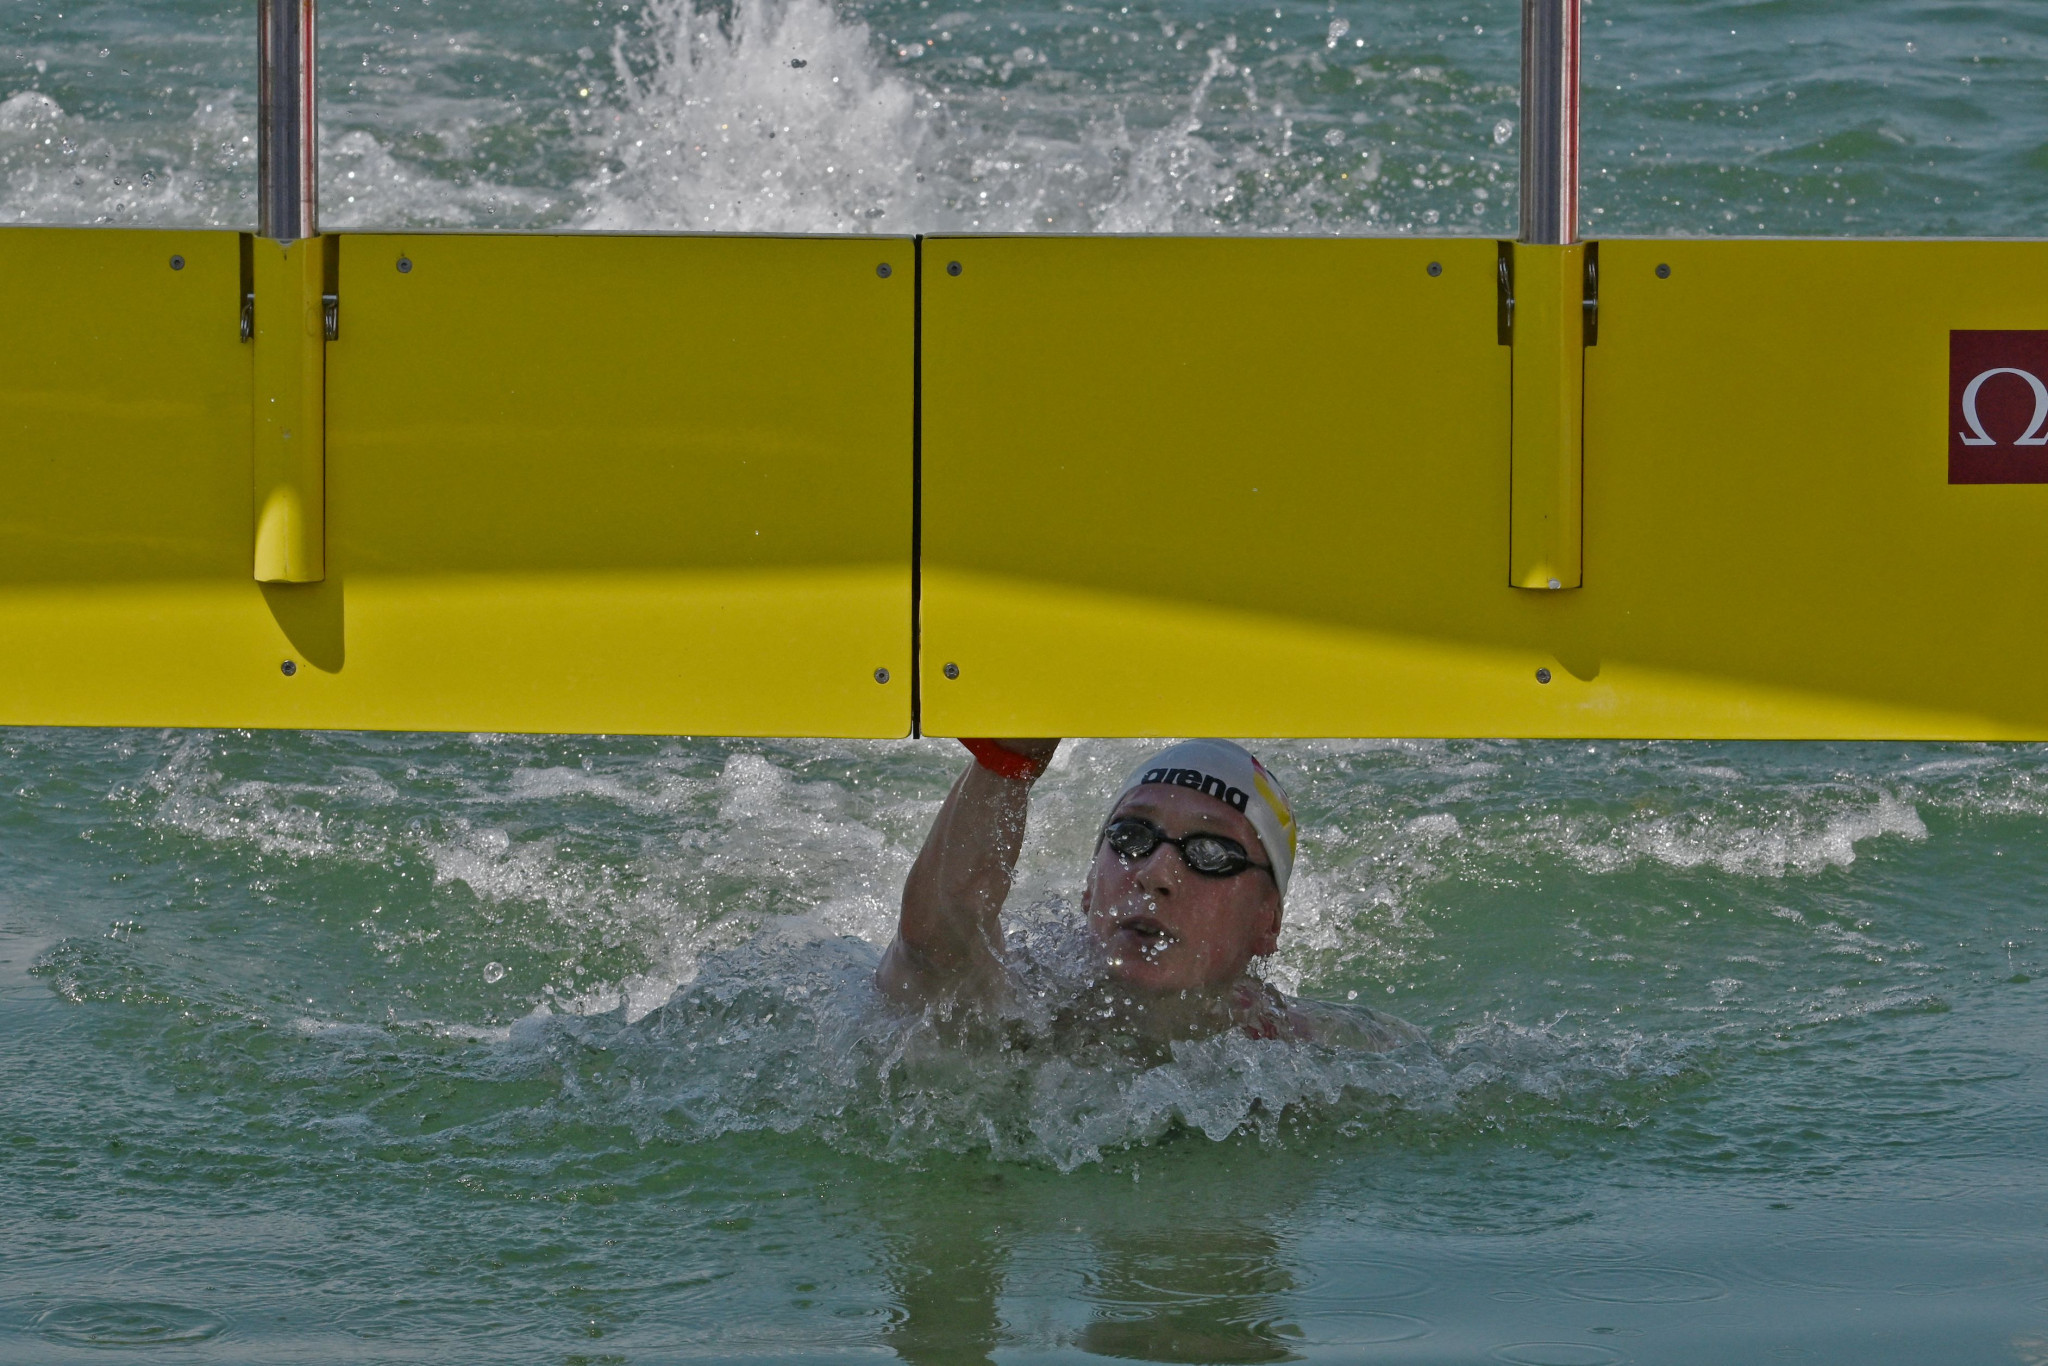 Wellbrock brilliance earns Germany mixed 4x1,500m relay open water swimming gold